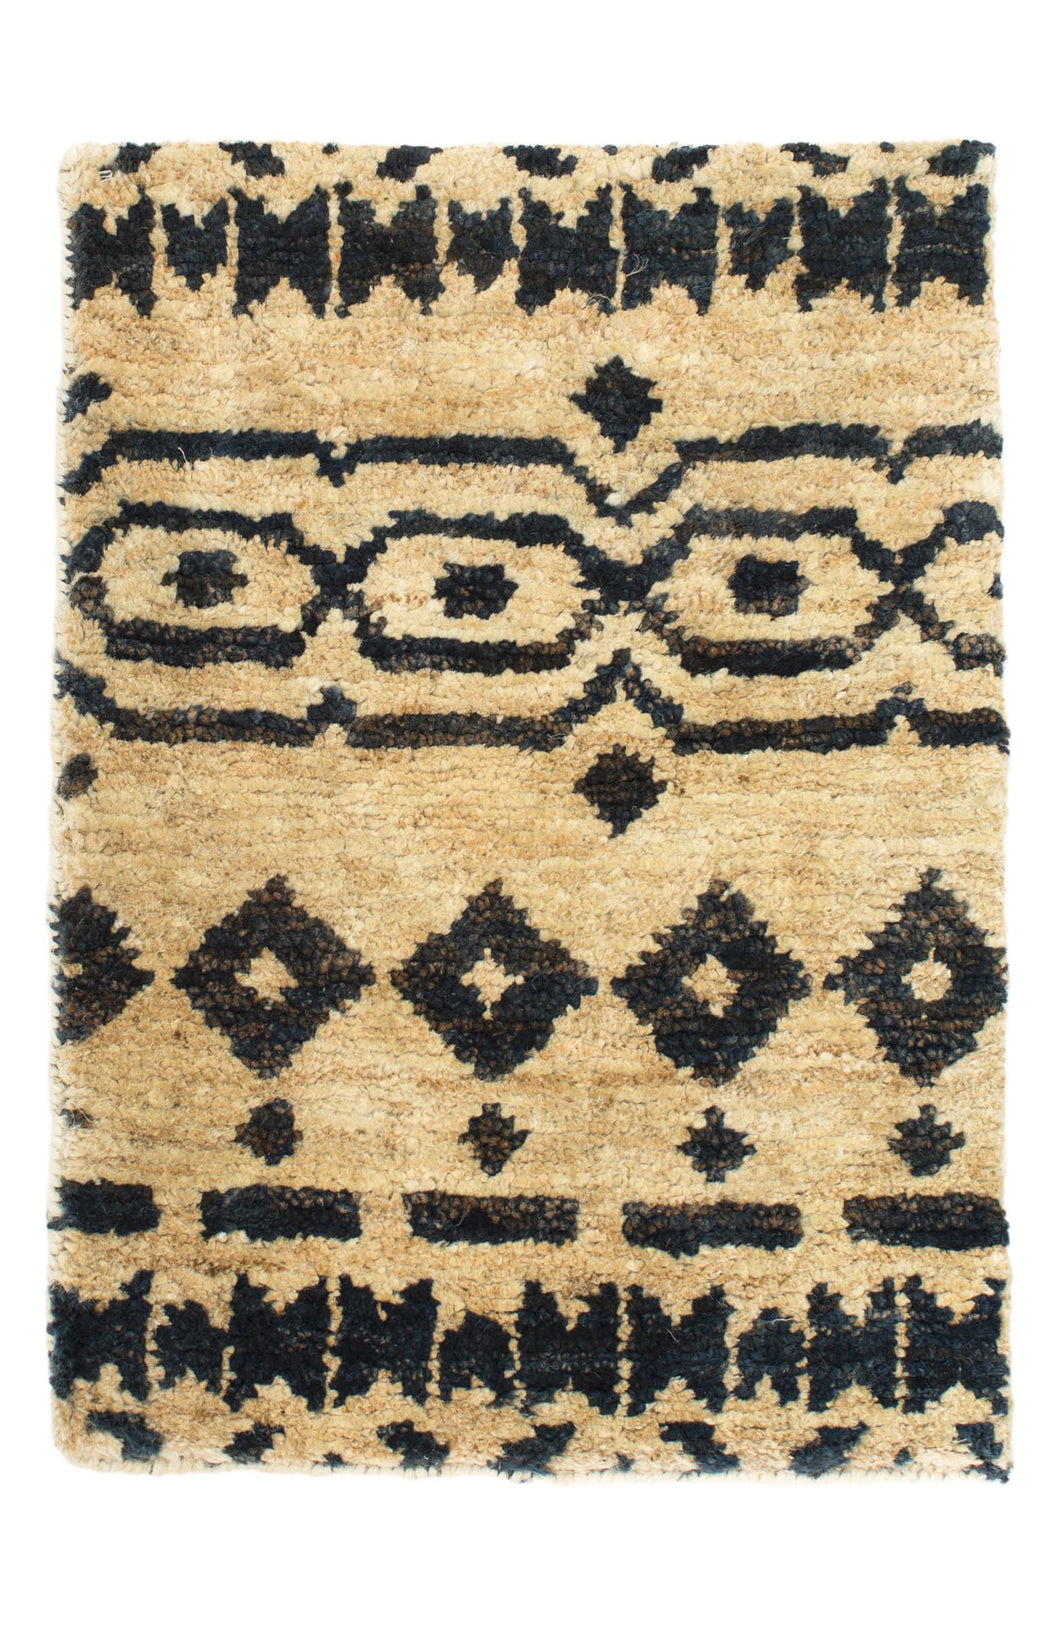 Taza Hand Knotted Jute Rug, 8' x 10'